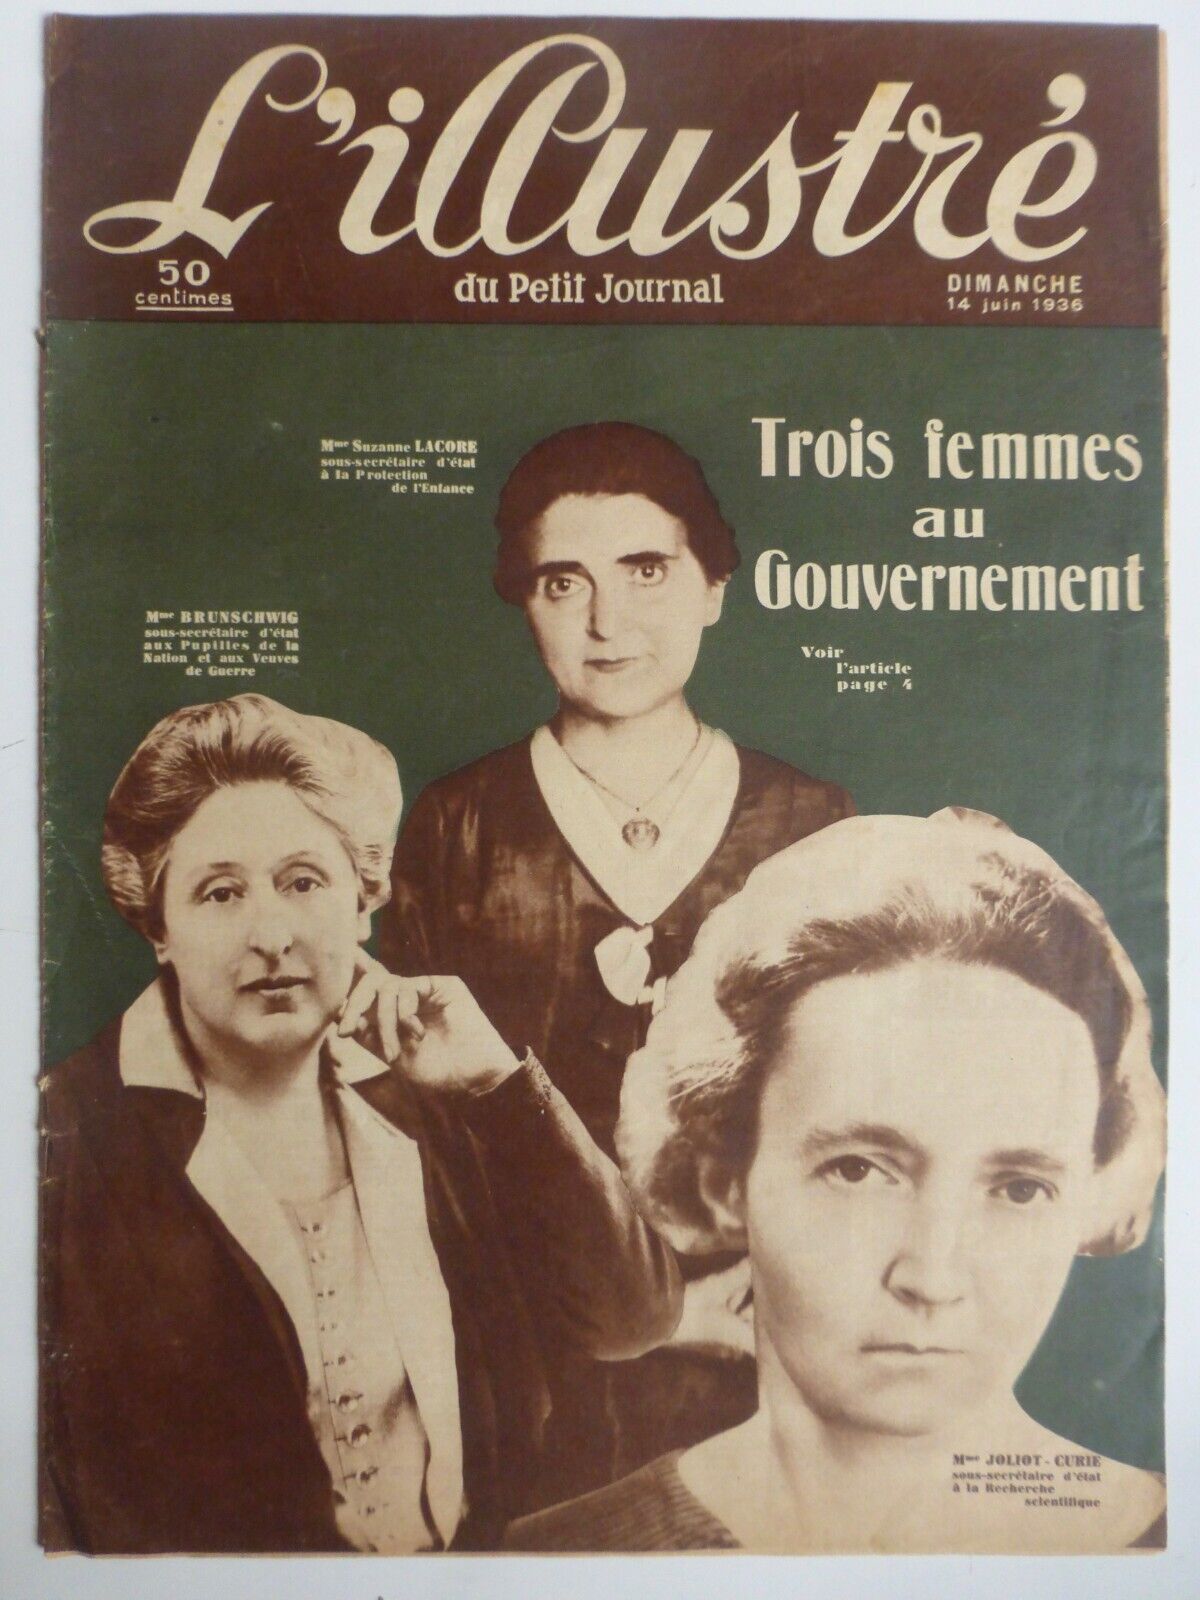 1936 WOMAN MARIE CURIE GOVERNMENT 1 ANTIQUE NEWSPAPER